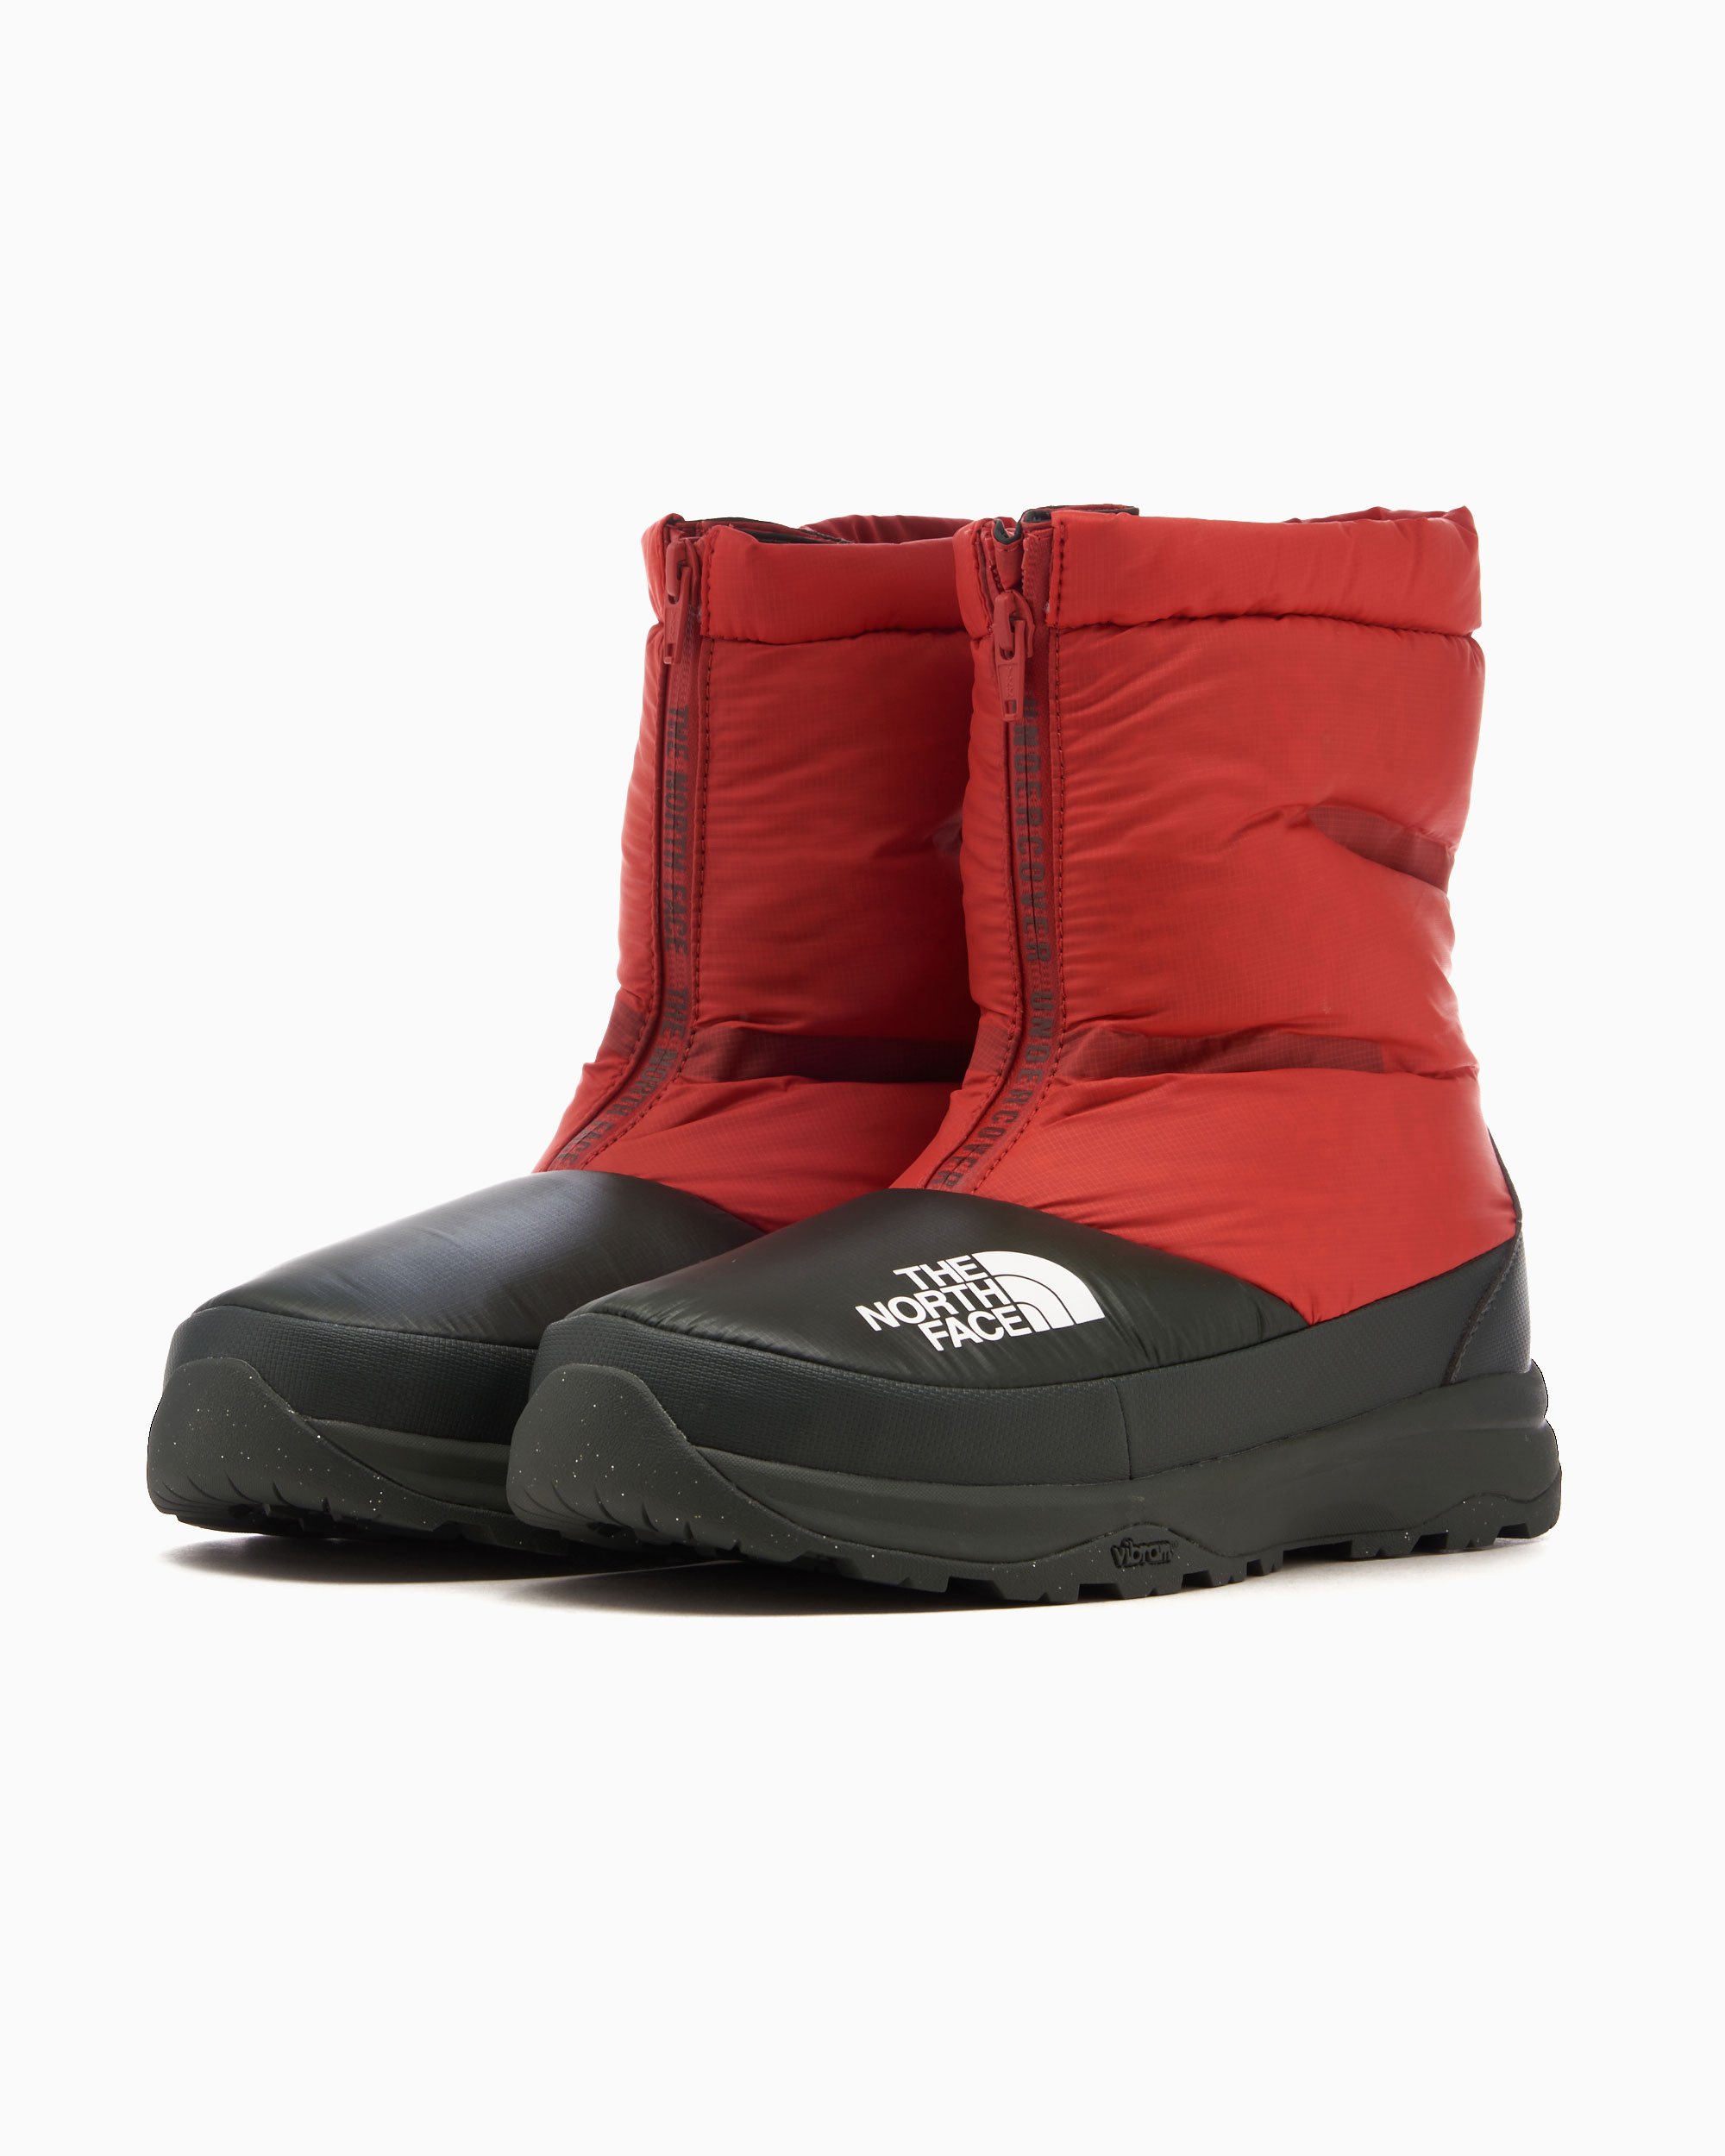 The North Face x Undercover Soukuu Nuptse Down Boots Vibram Red 